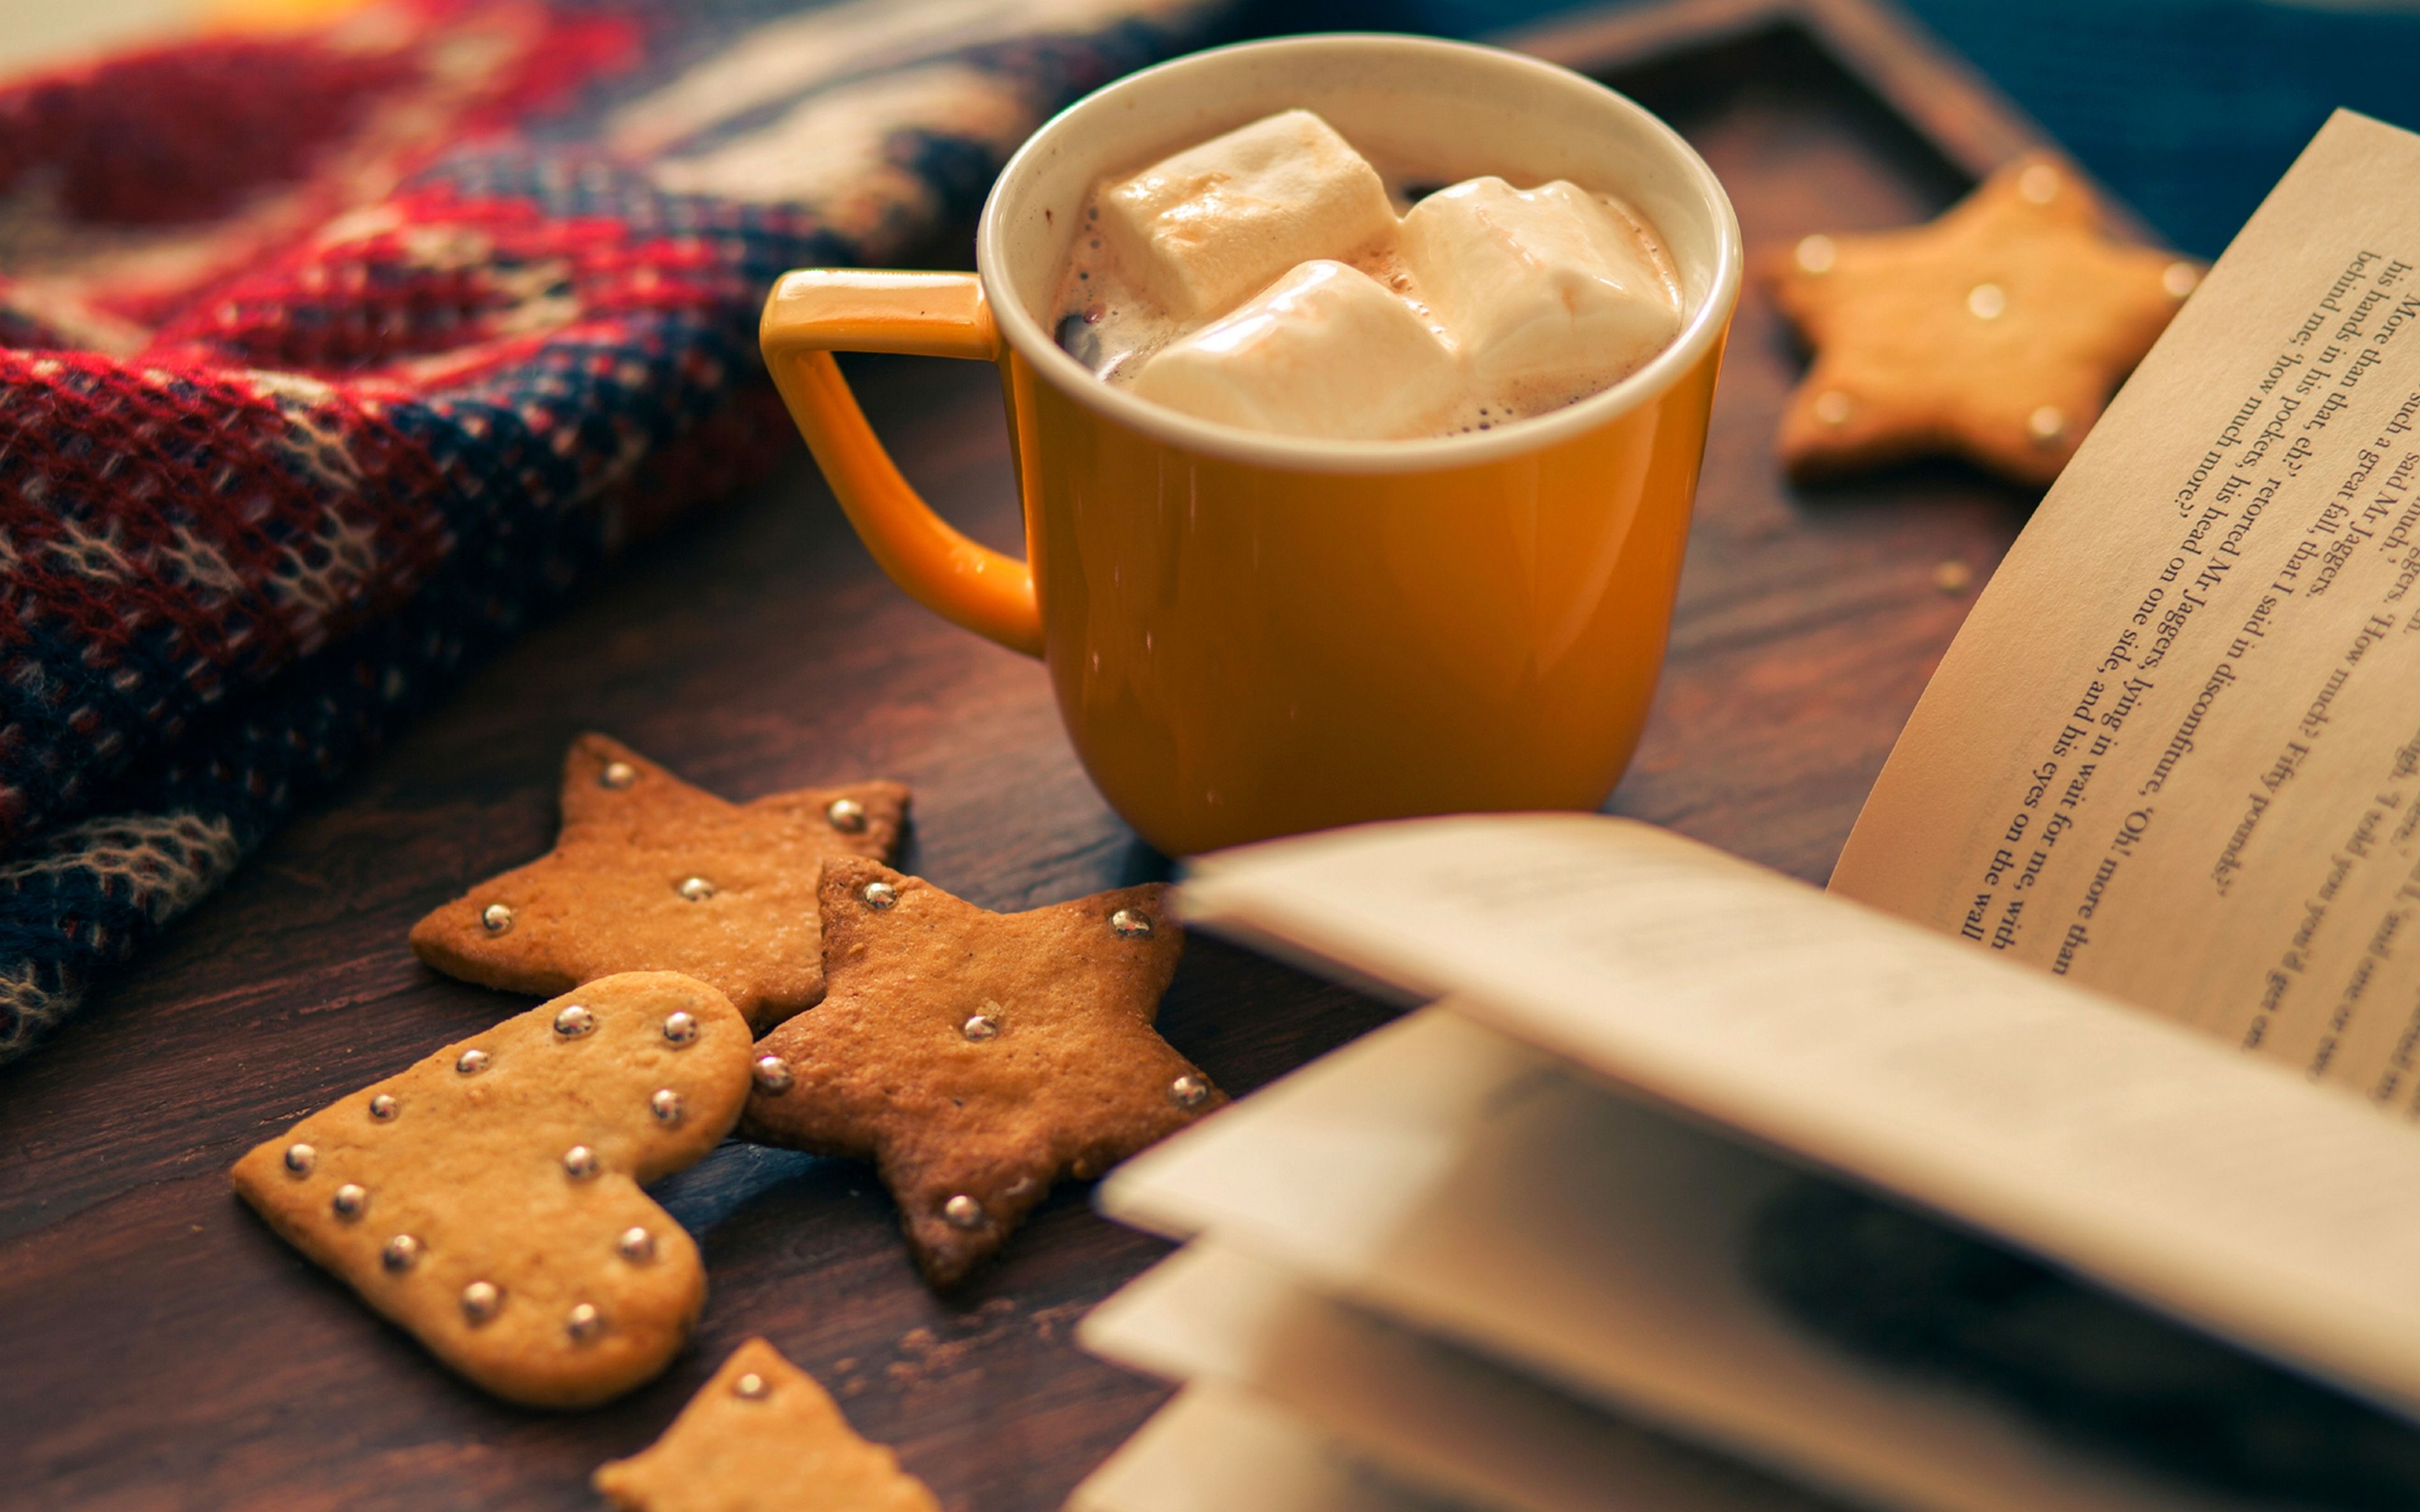 Download wallpaper winter, holiday, heart, star, food, cookies, Cup, book, star, heart, winter, cup, cocoa, book, holiday, cocoa, section food in resolution 3800x2375